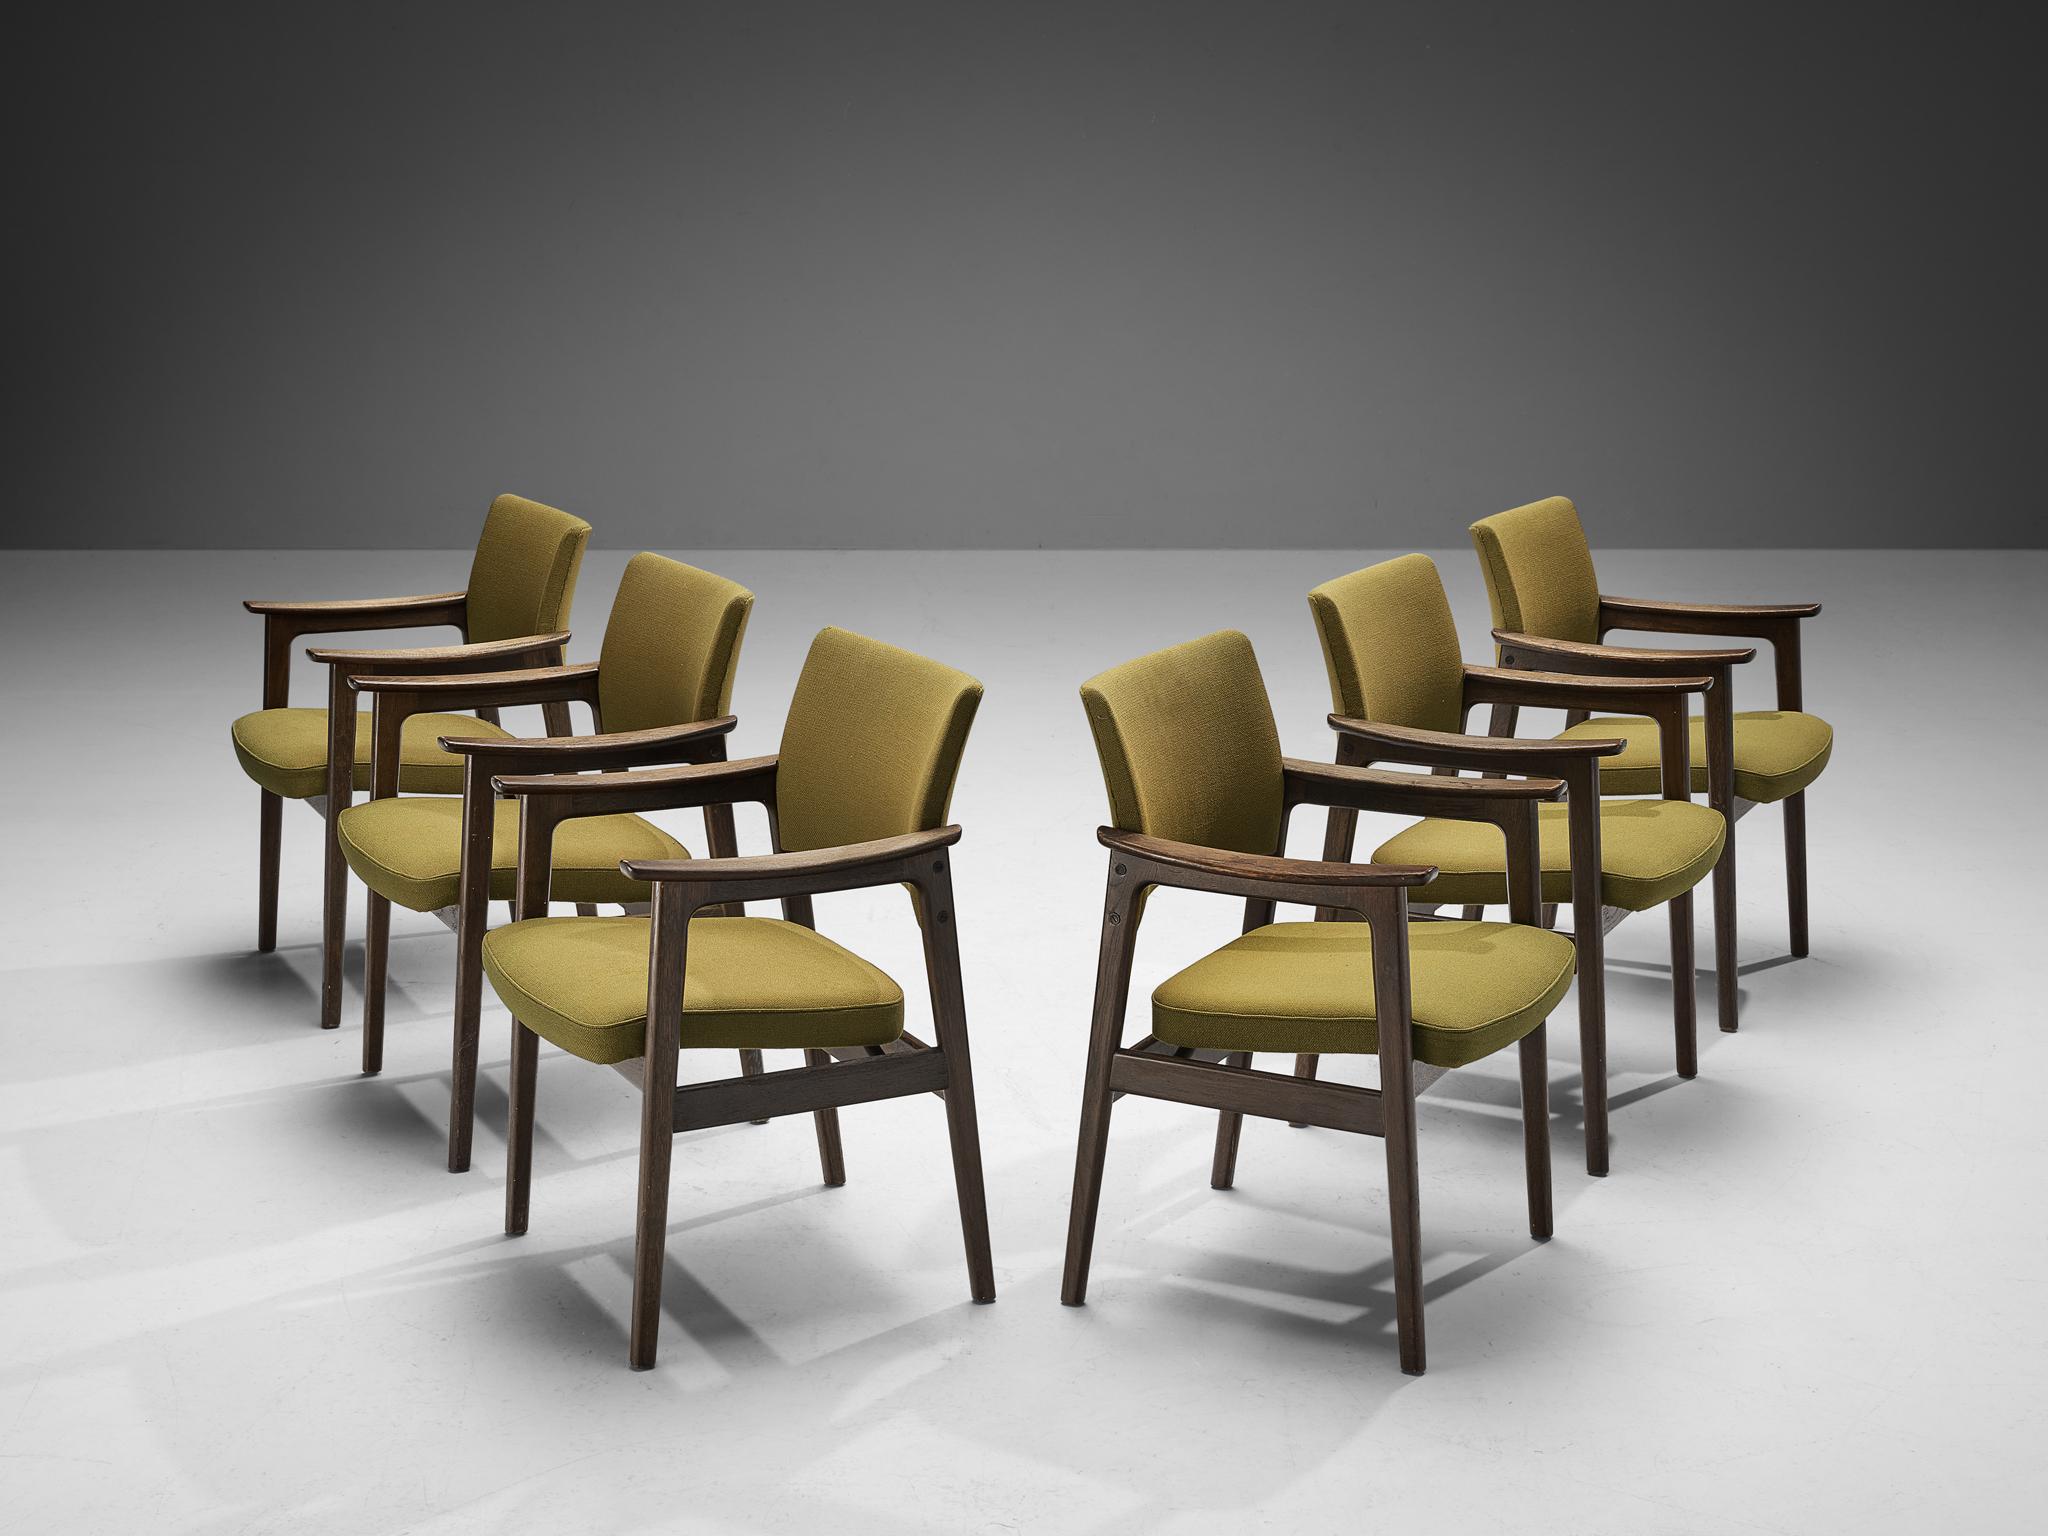 Erik Kirkegaard for Høng Stølefabrik, set of six armchairs, oak, fabric, Denmark, 1960s

This set of dining chairs are sculpturally structured embodying delicate round shapes and sturdy lines. The curved shape can be recognized in both the armrests